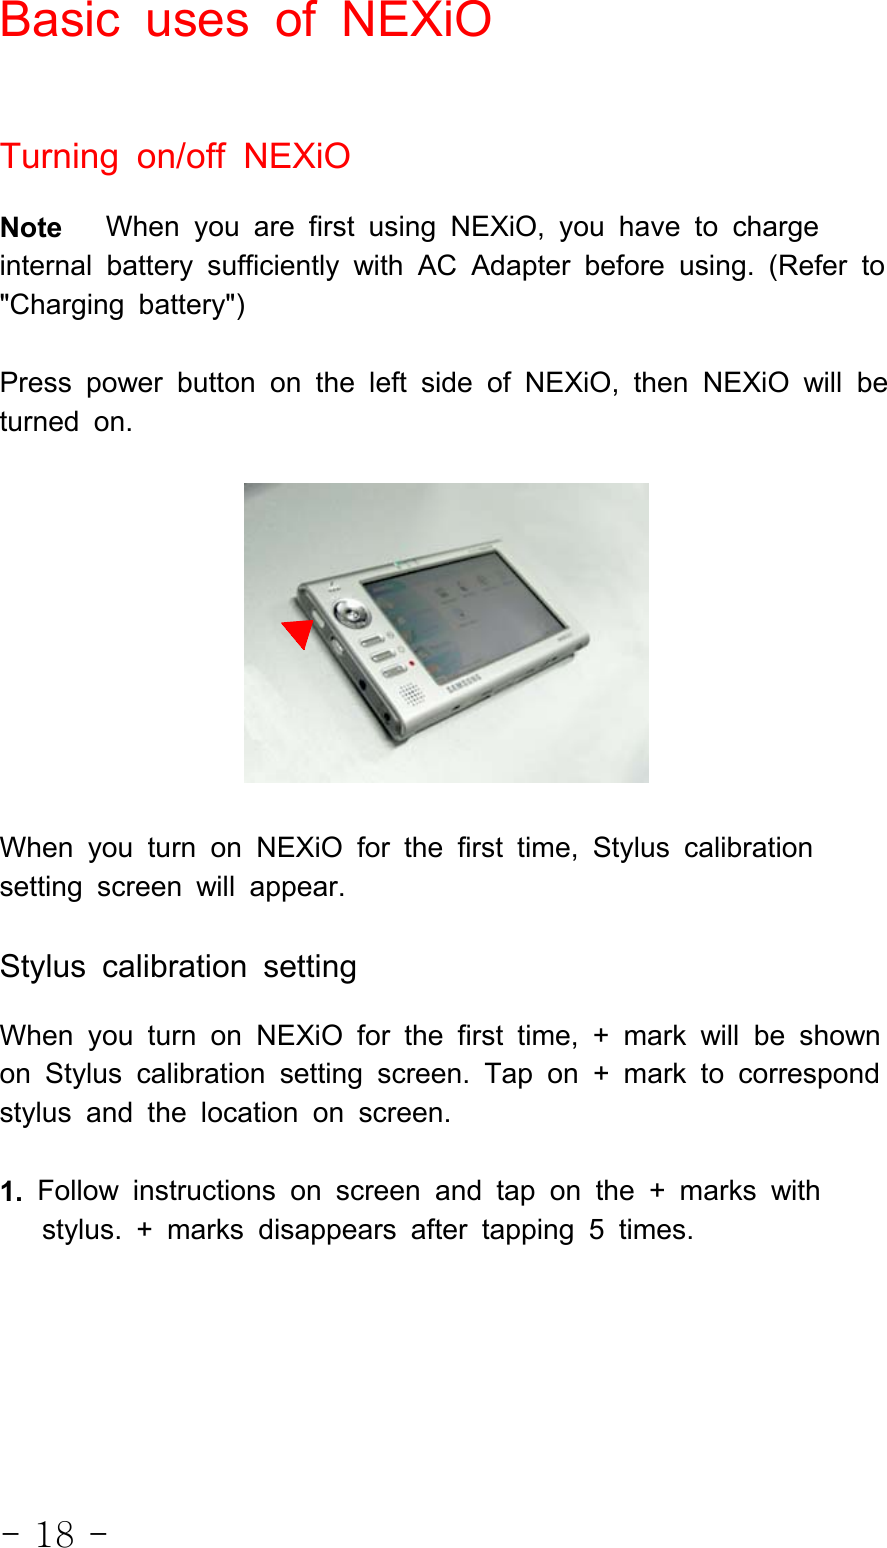 - 18 -Basic uses of NEXiOTurning on/off NEXiONote When you are first using NEXiO, you have to chargeinternal battery sufficiently with AC Adapter before using. (Refer to&quot;Charging battery&quot;)Press power button on the left side of NEXiO, then NEXiO will beturned on.When you turn on NEXiO for the first time, Stylus calibrationsetting screen will appear.Stylus calibration settingWhen you turn on NEXiO for the first time, + mark will be shownon Stylus calibration setting screen. Tap on + mark to correspondstylus and the location on screen.1. Follow instructions on screen and tap on the + marks withstylus. + marks disappears after tapping 5 times.